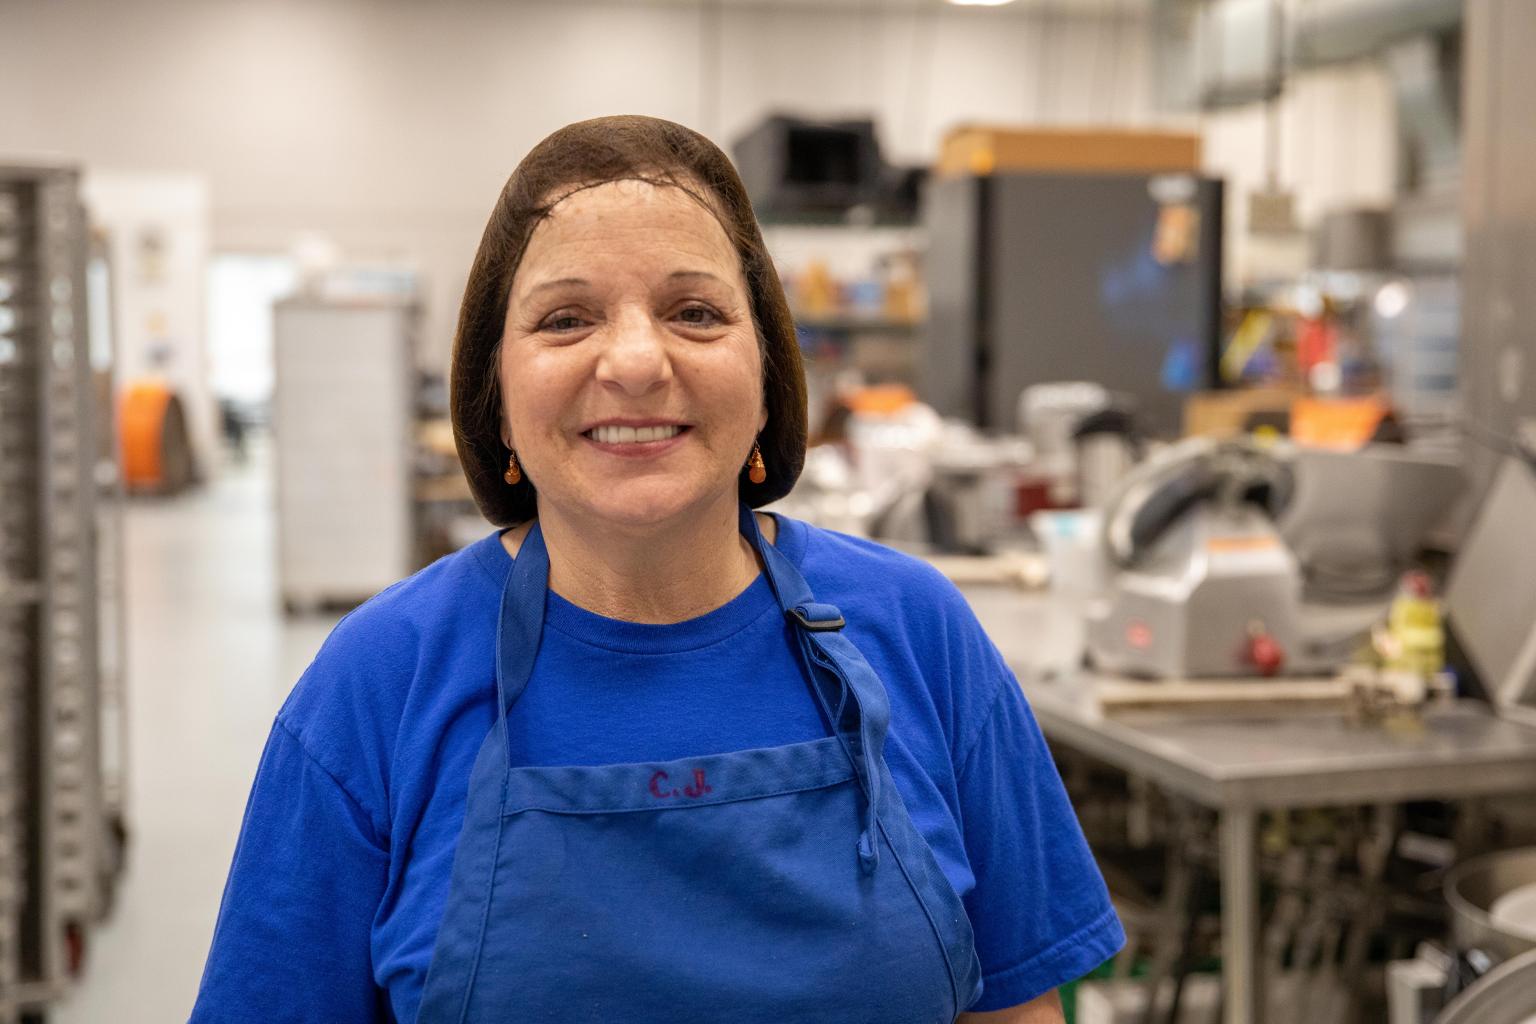 Woman in apron and hairnet looking into the camera